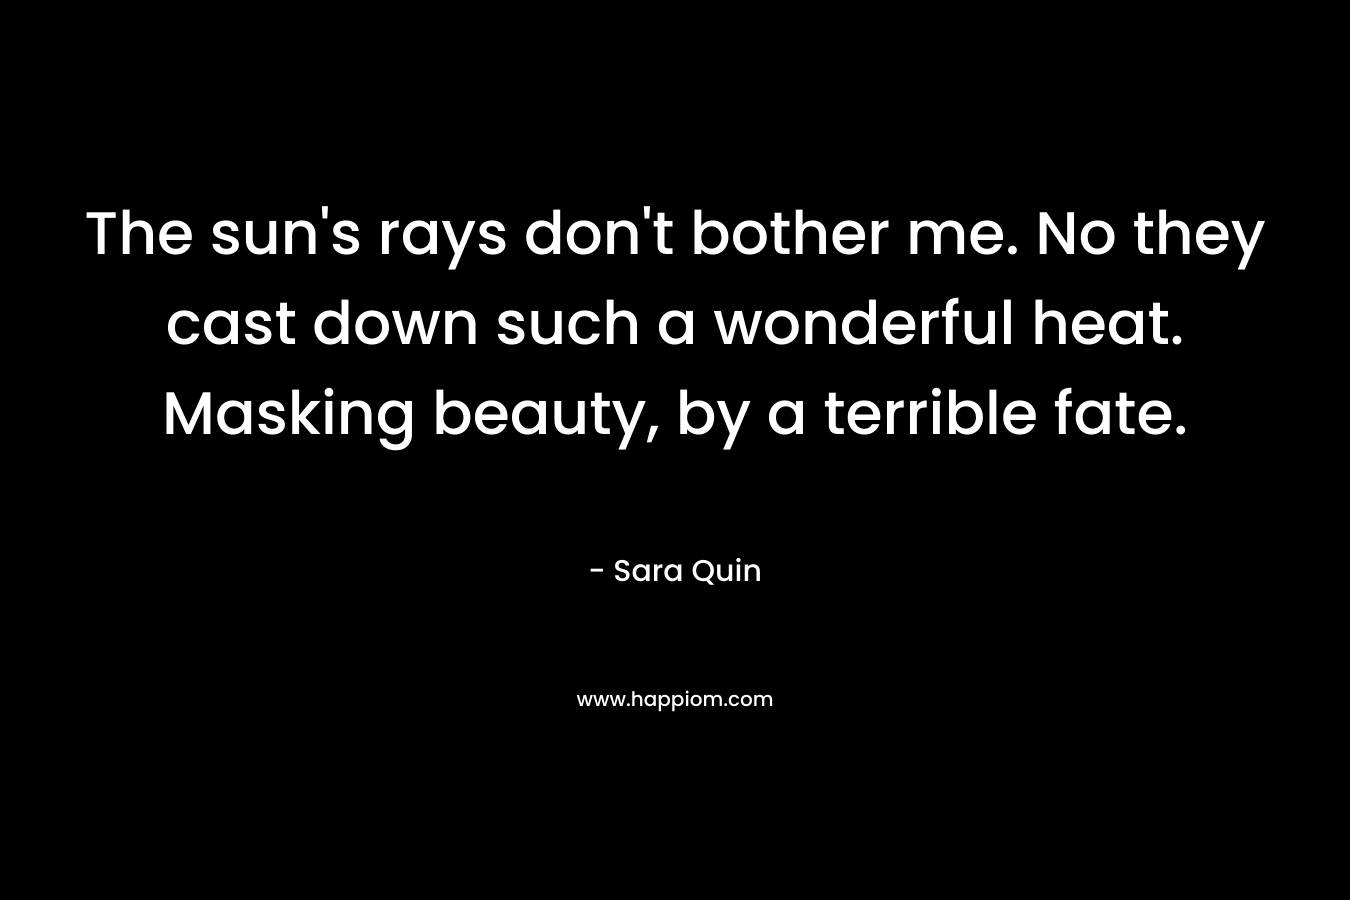 The sun’s rays don’t bother me. No they cast down such a wonderful heat. Masking beauty, by a terrible fate. – Sara Quin